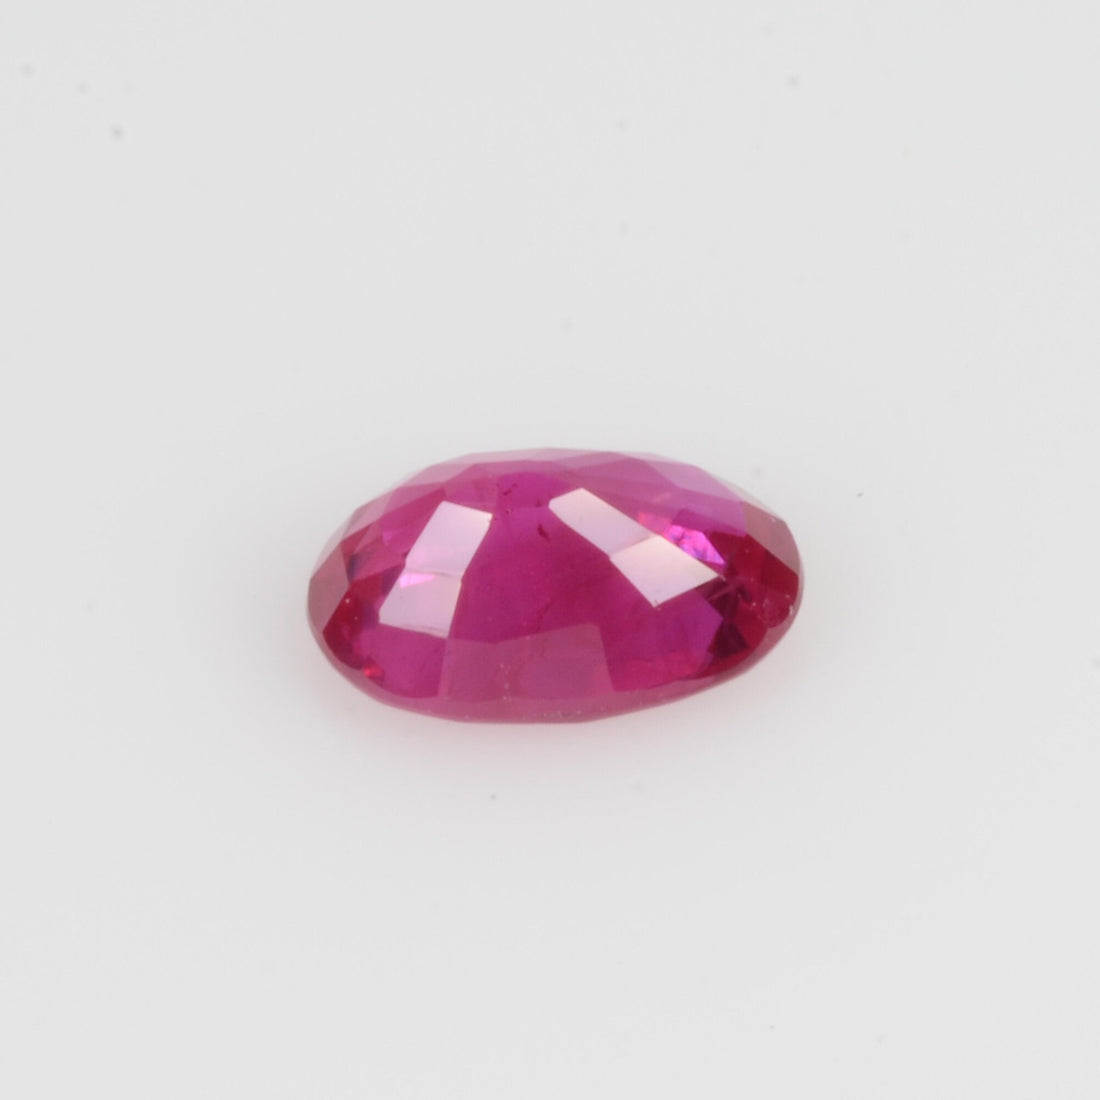 0.49 Cts Natural Ruby Loose Gemstone Oval Cut